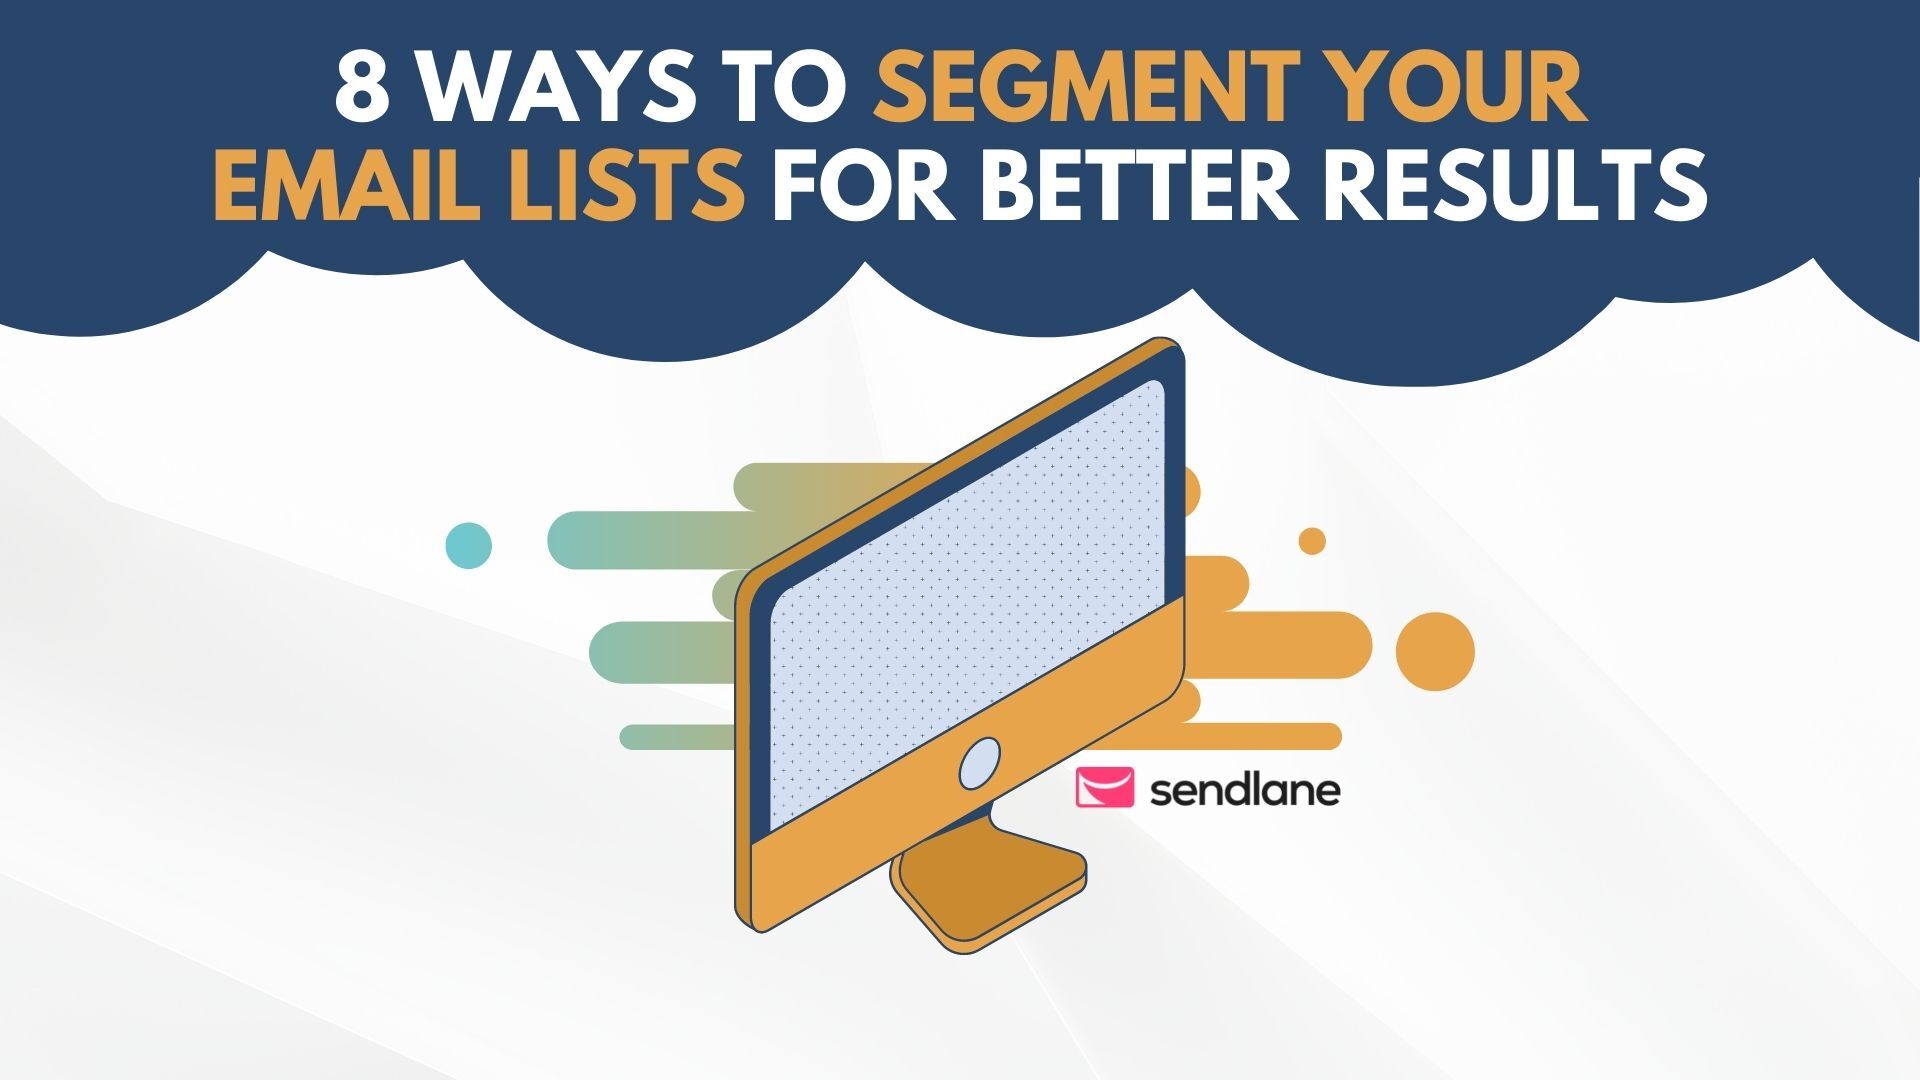 8 ways to segment your email lists for better results 1